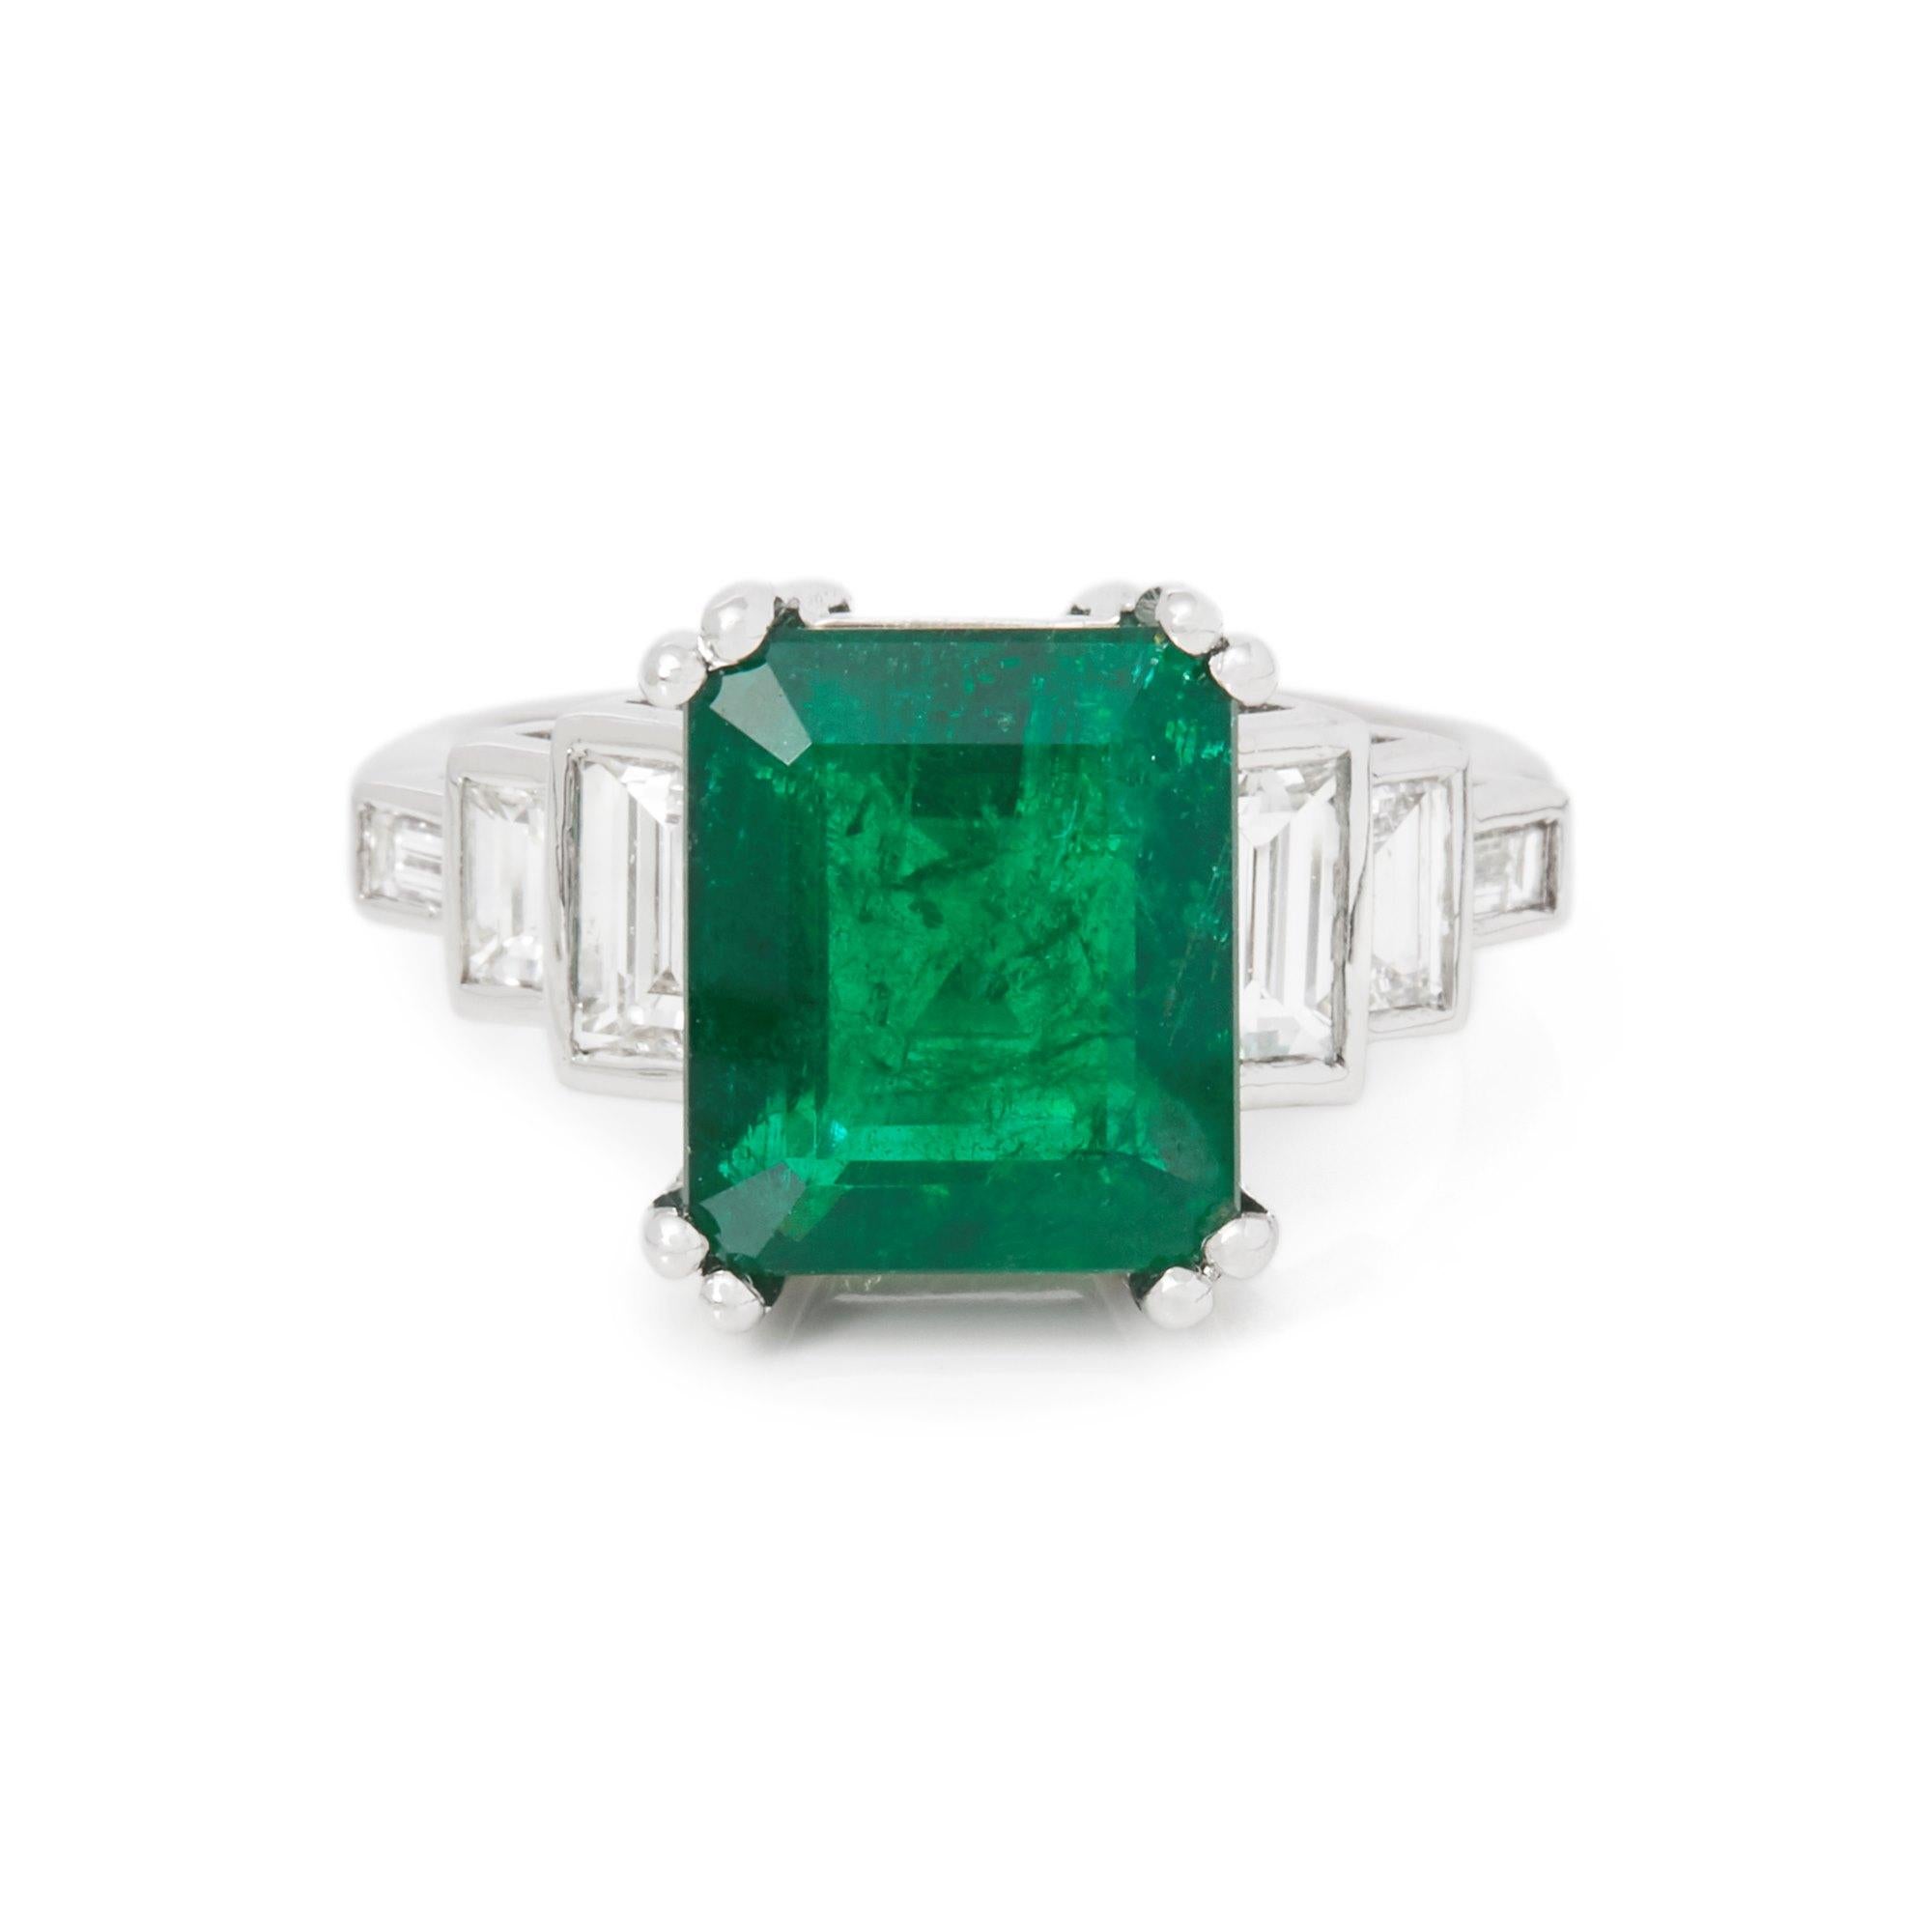 This ring designed by David Jerome is from his private collection and features one square Emerald cut Emerald totalling 4.80cts sourced in Columbia. Set with step baguette cut Diamonds totalling 1.12cts mounted in an 18k white gold setting. UK